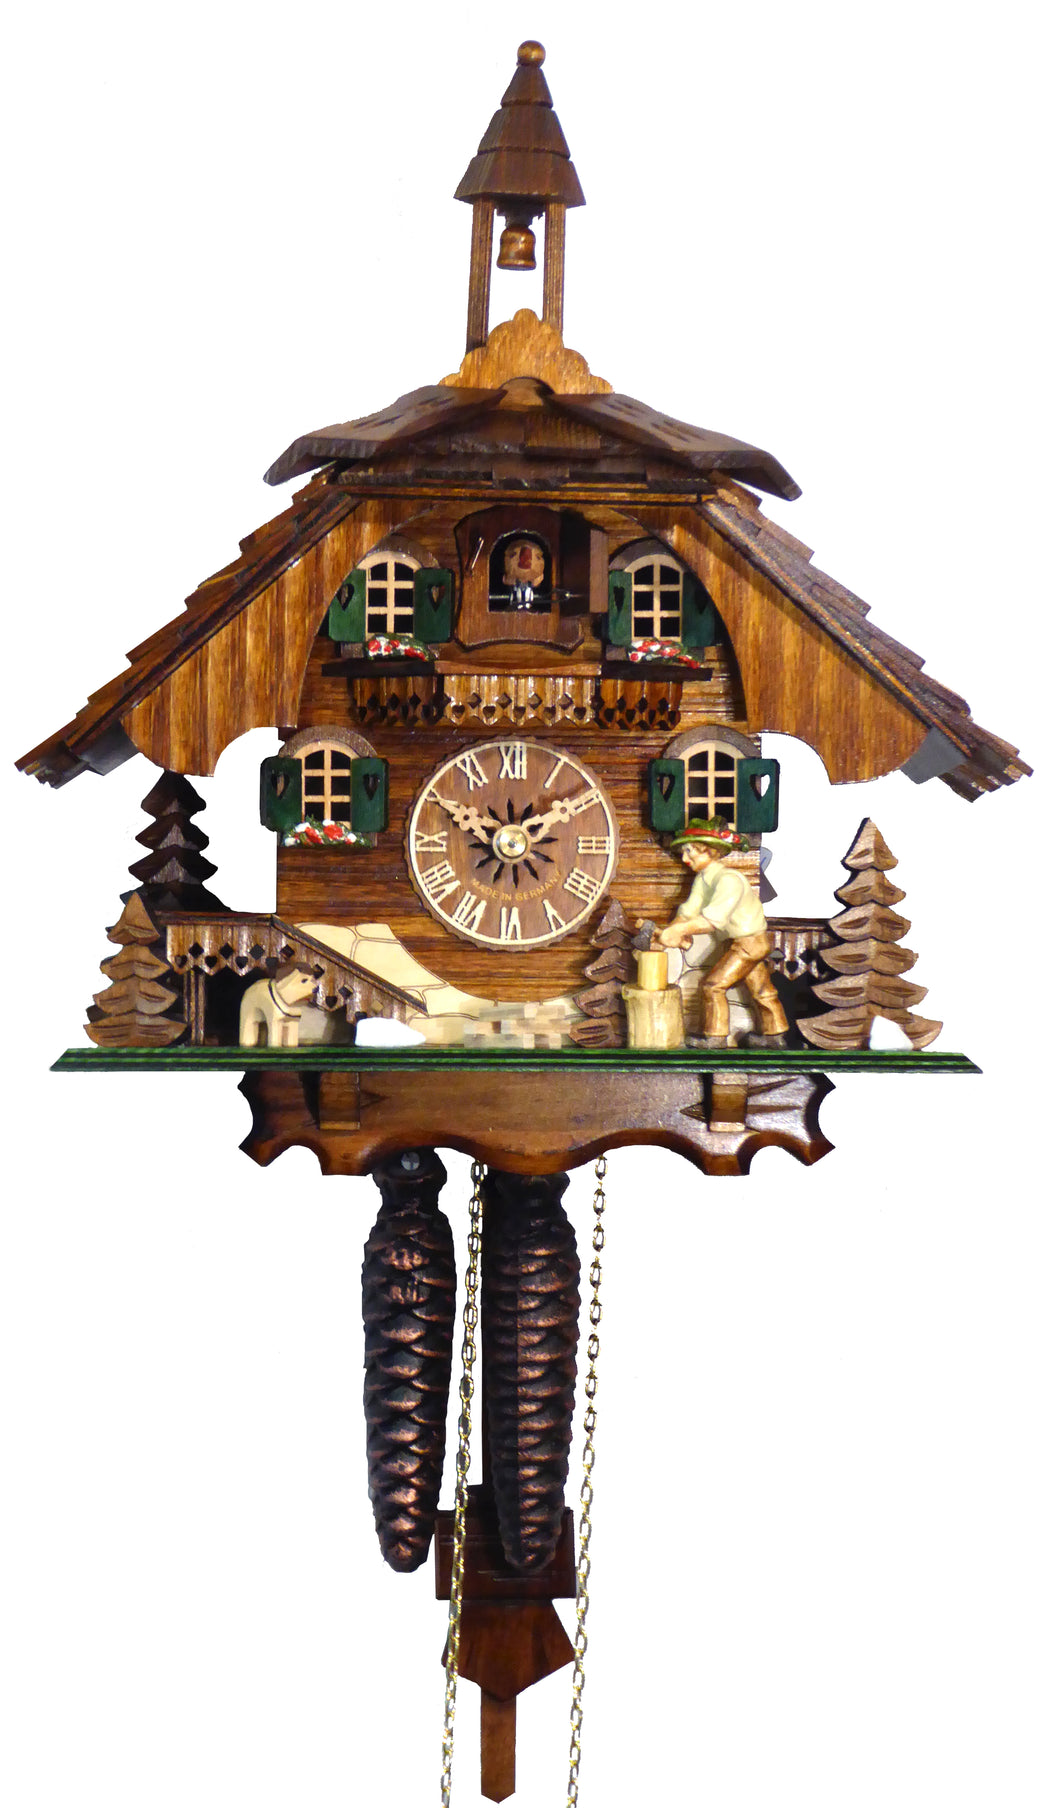 NEW - Rustic Chalet Clock with Moving Wood Chopper